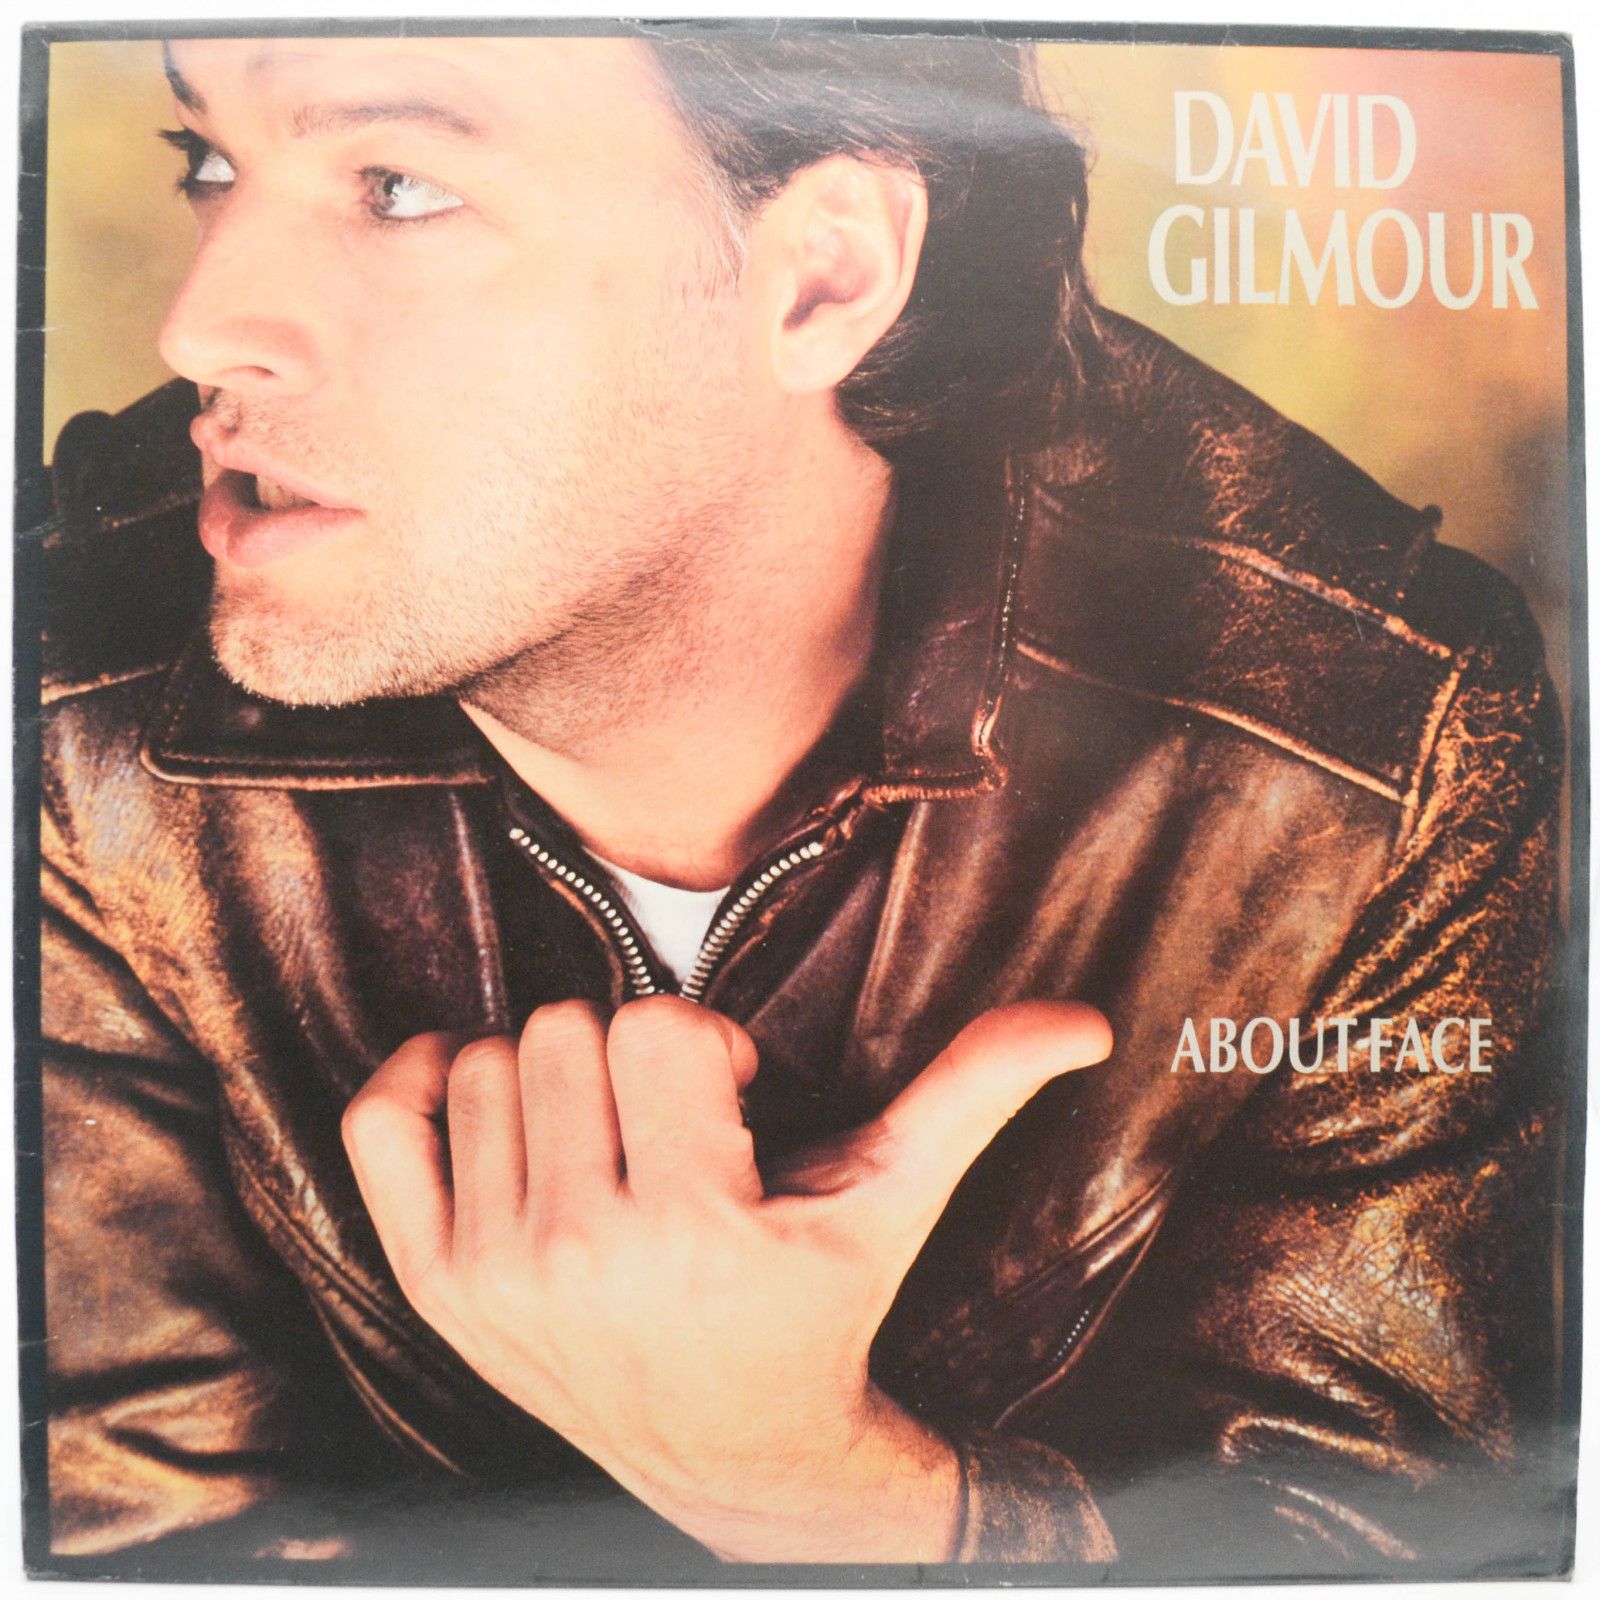 David Gilmour — About Face, 1984